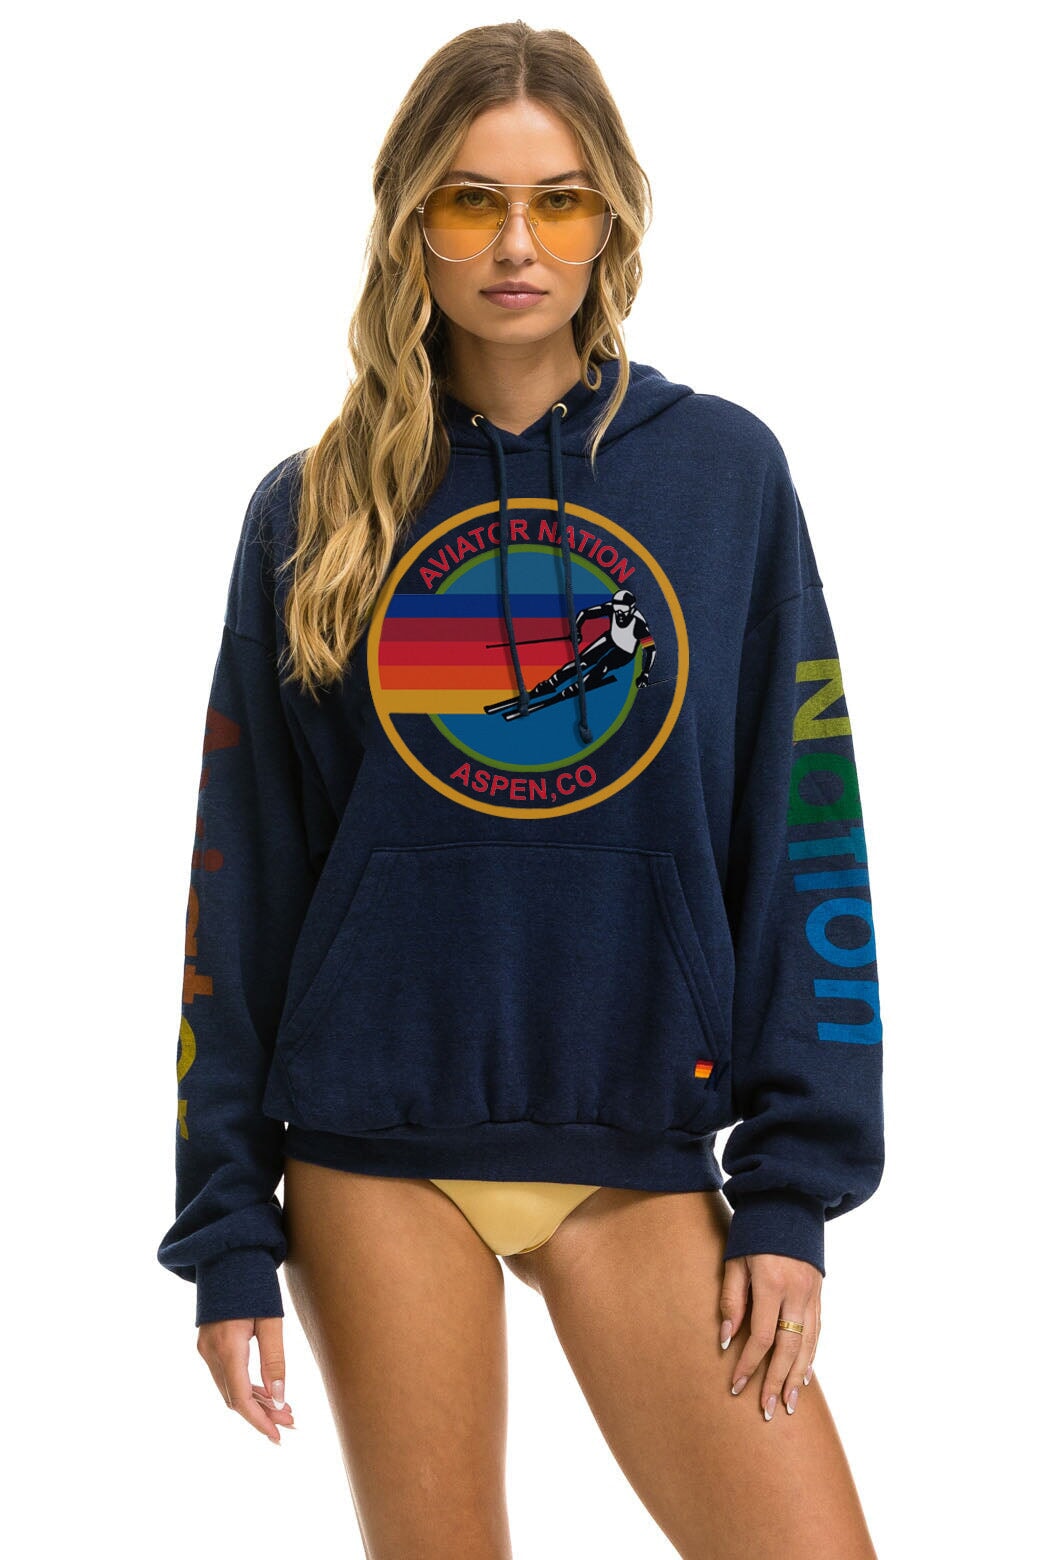 AVIATOR NATION ASPEN RELAXED PULLOVER HOODIE - NAVY Hoodie Aviator Nation 